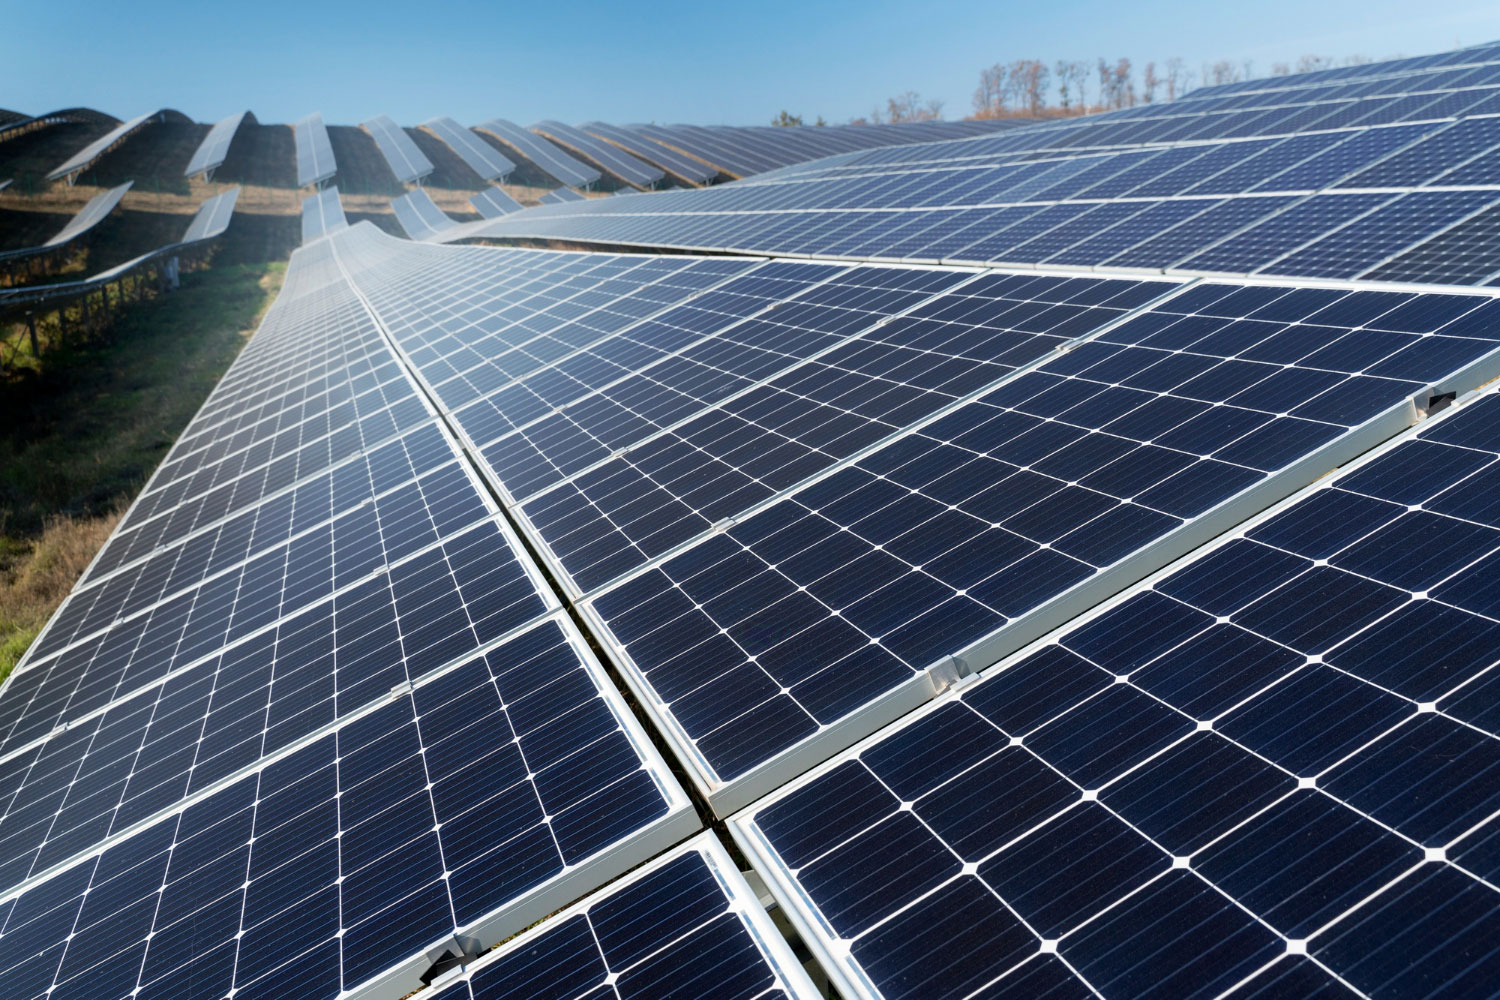 Researchers combine two solar tech to improve efficiency and stability.